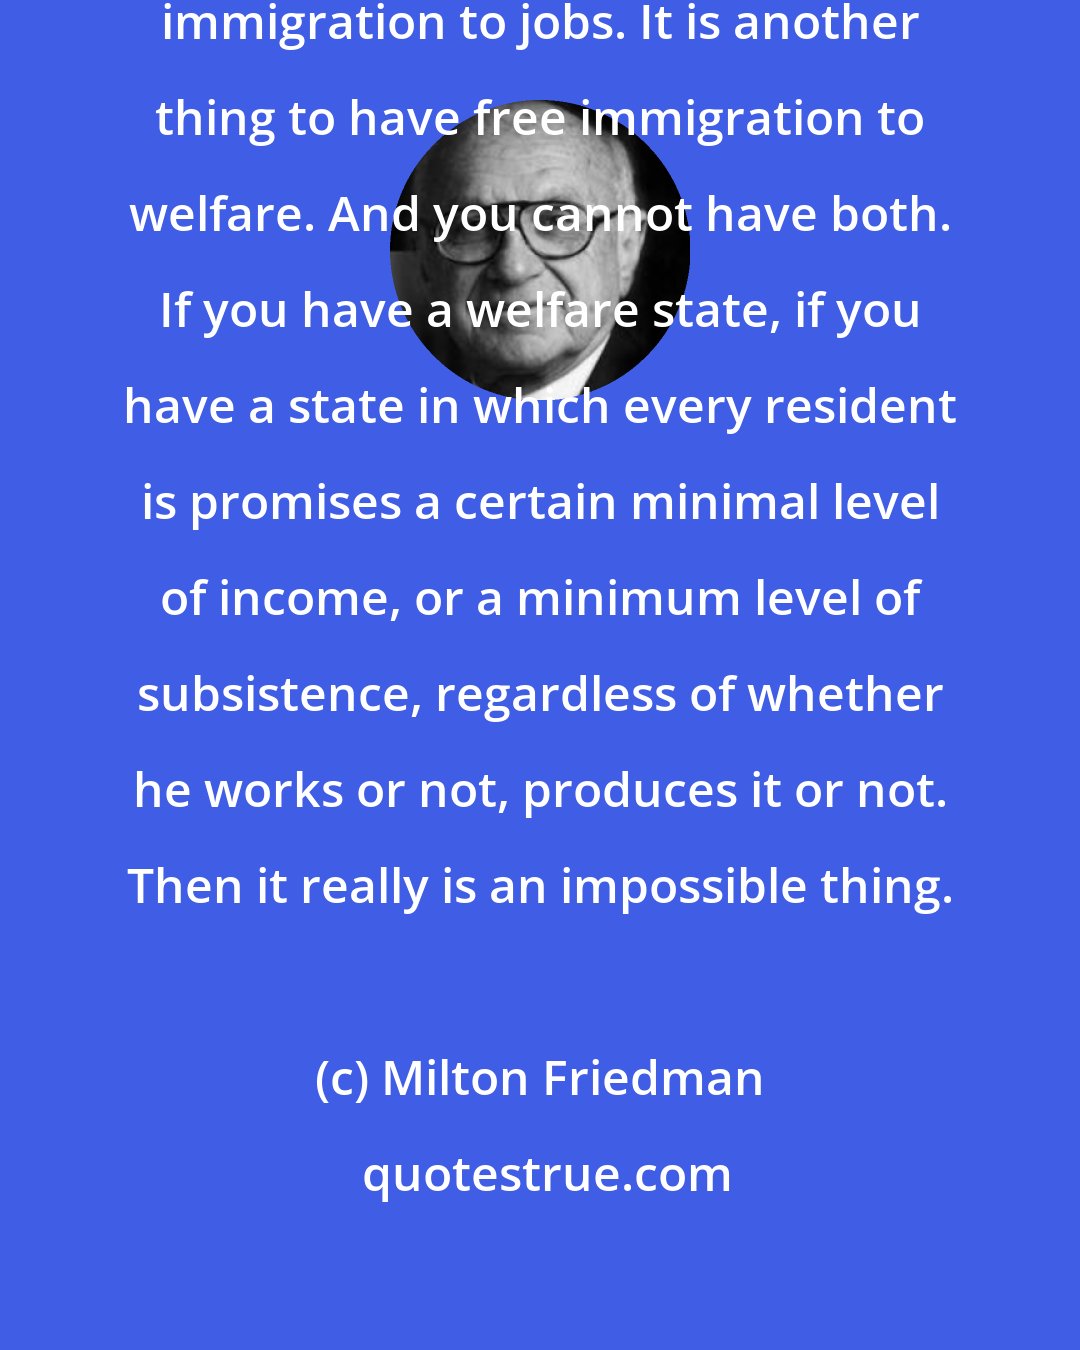 Milton Friedman: Because it is one thing to have free immigration to jobs. It is another thing to have free immigration to welfare. And you cannot have both. If you have a welfare state, if you have a state in which every resident is promises a certain minimal level of income, or a minimum level of subsistence, regardless of whether he works or not, produces it or not. Then it really is an impossible thing.